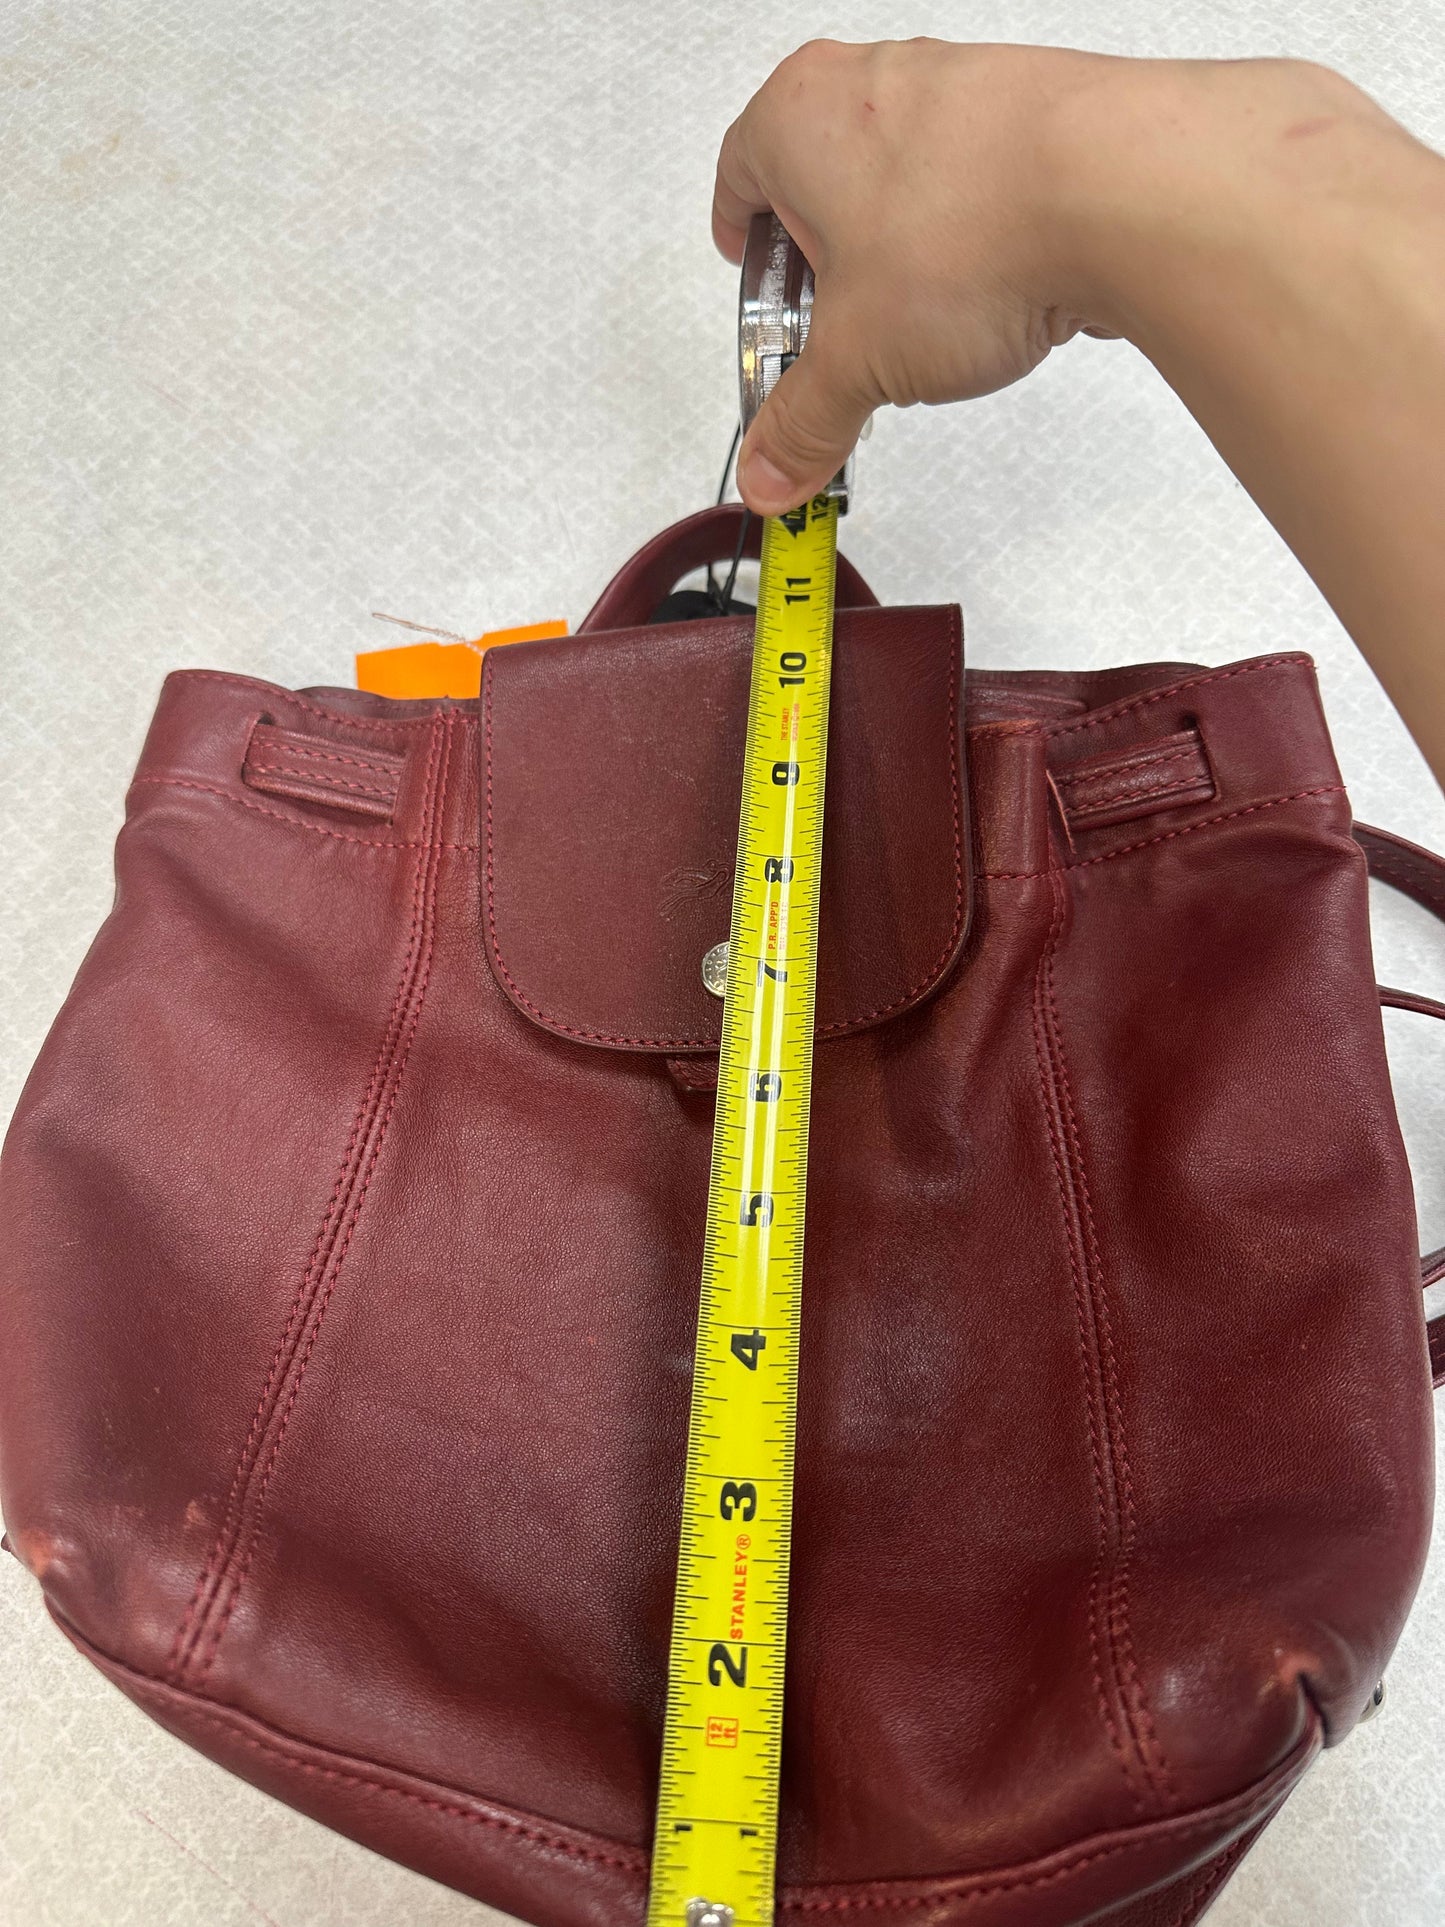 Backpack Leather By Longchamp  Size: Small